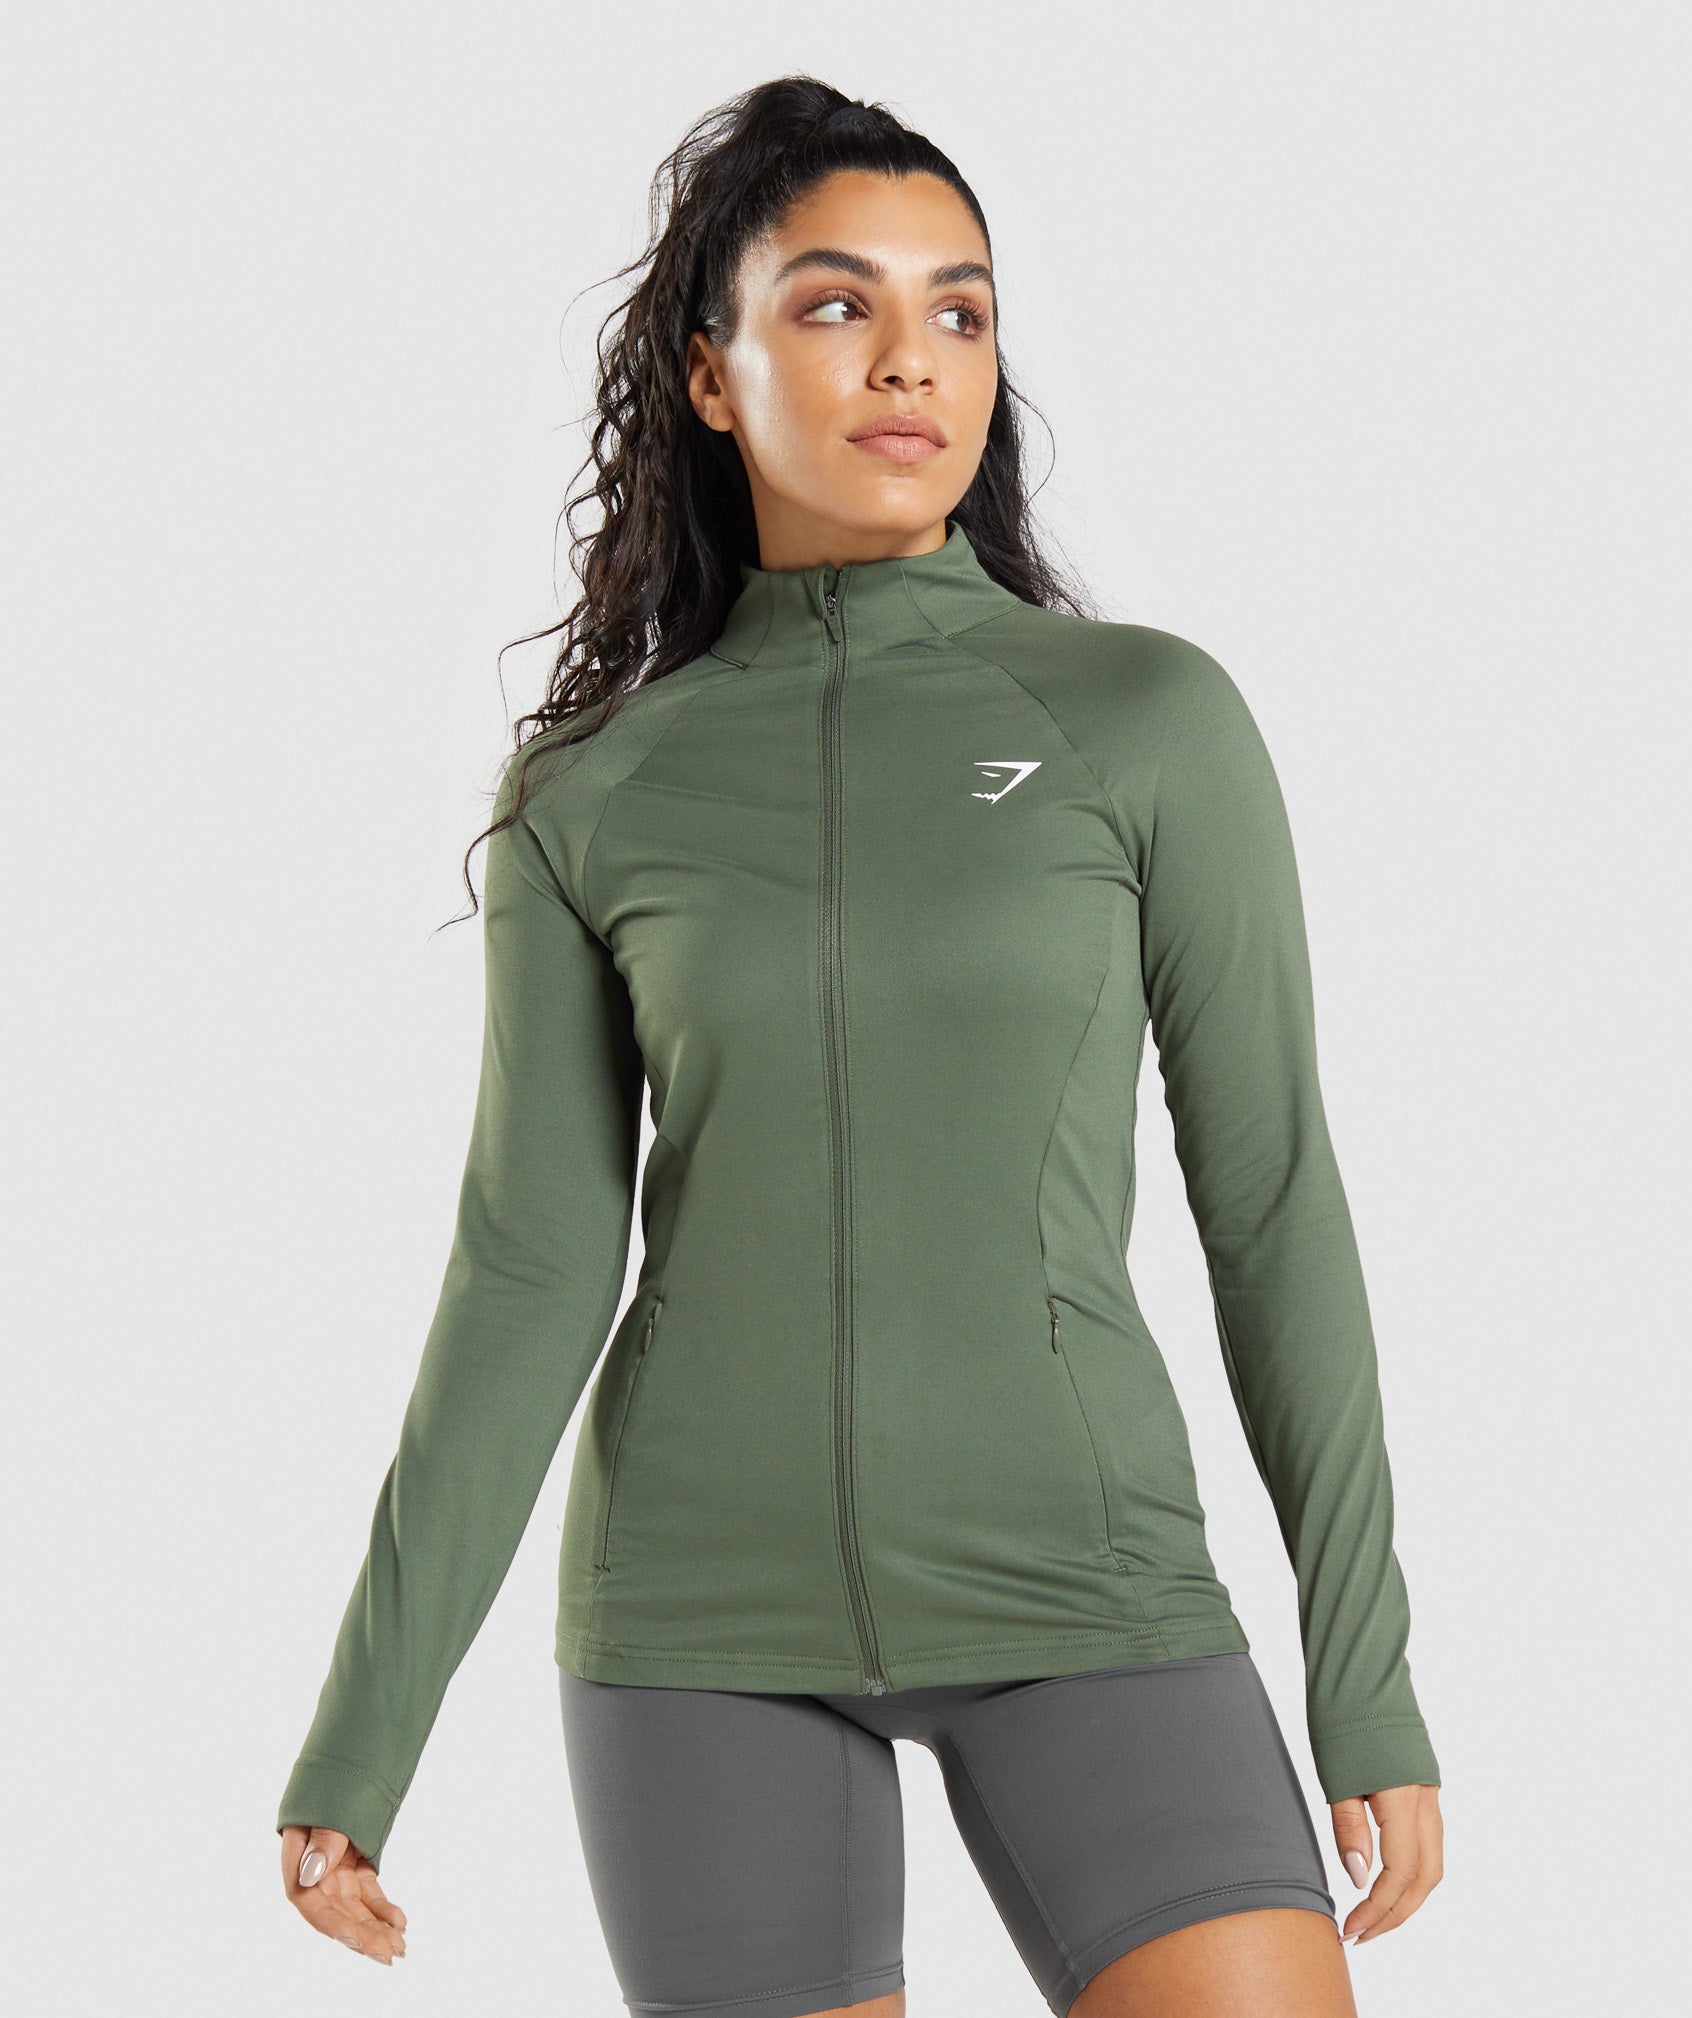 Training Jacket in Core Olive - view 1